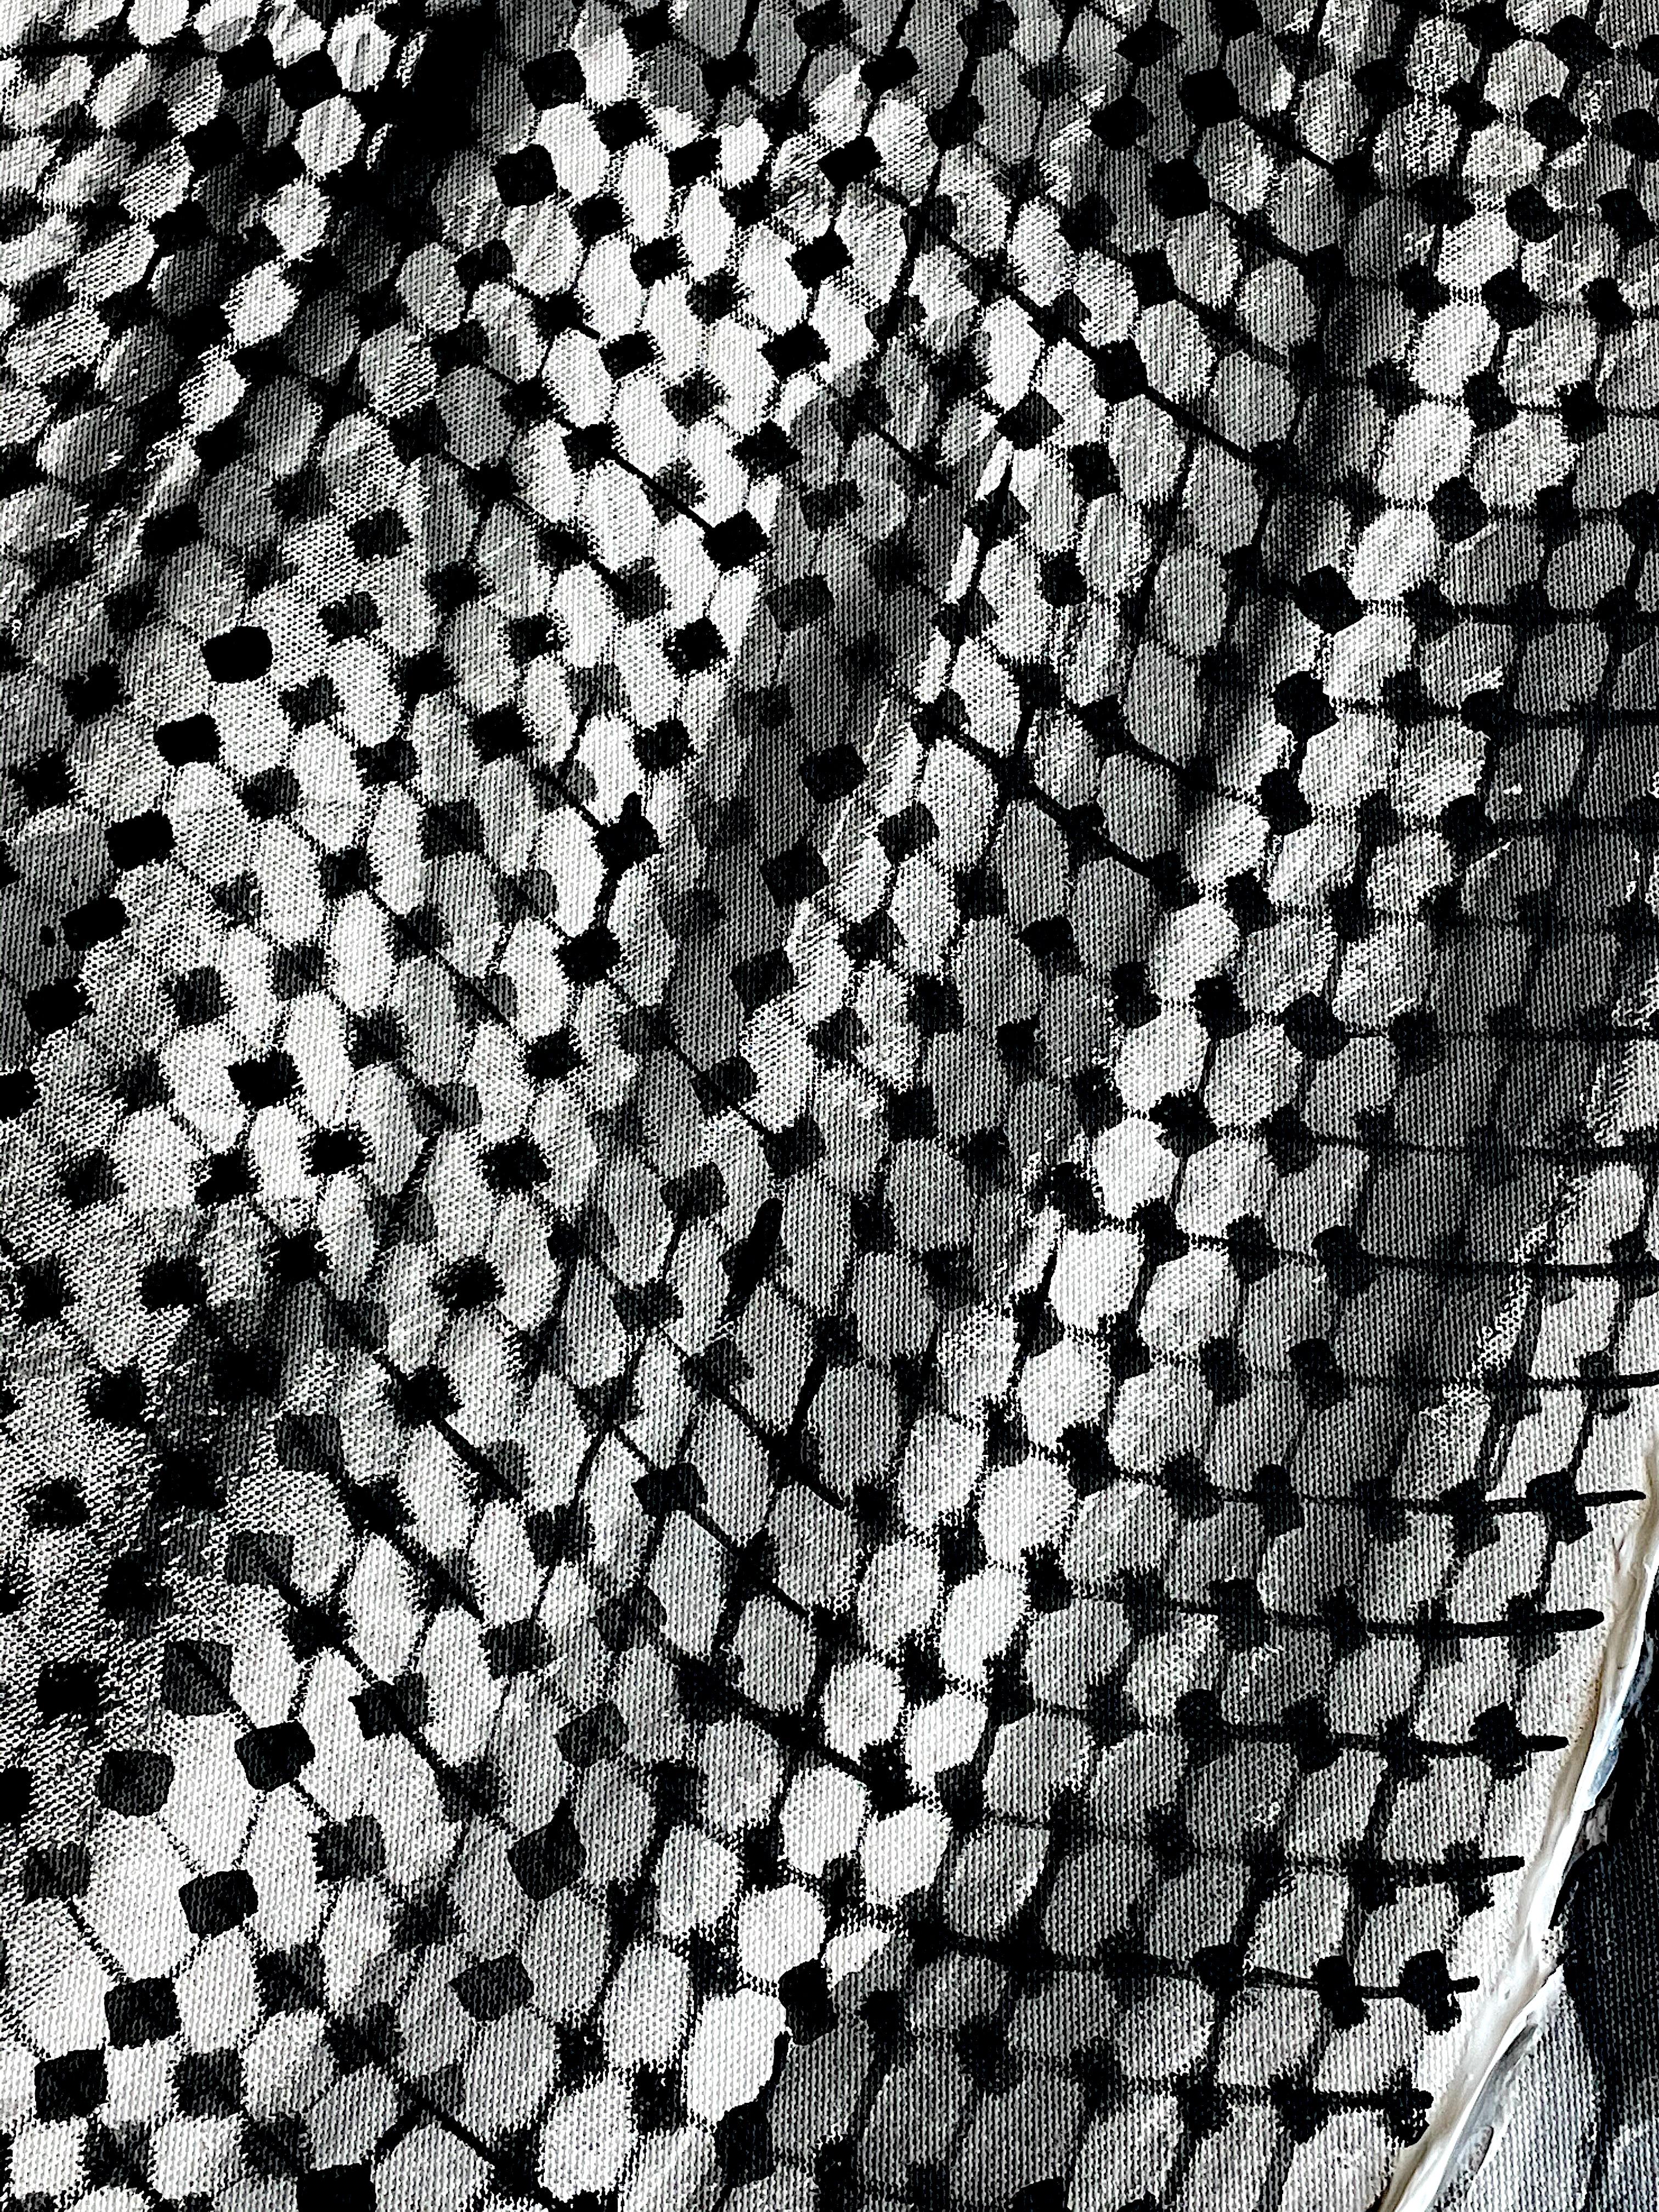 Camouflage II veiled in a masculine keffiyeh embodies empowerment, strength and confidence, and gazes directly at her gazer, disrupting the masculine gaze that is based on dualities.
